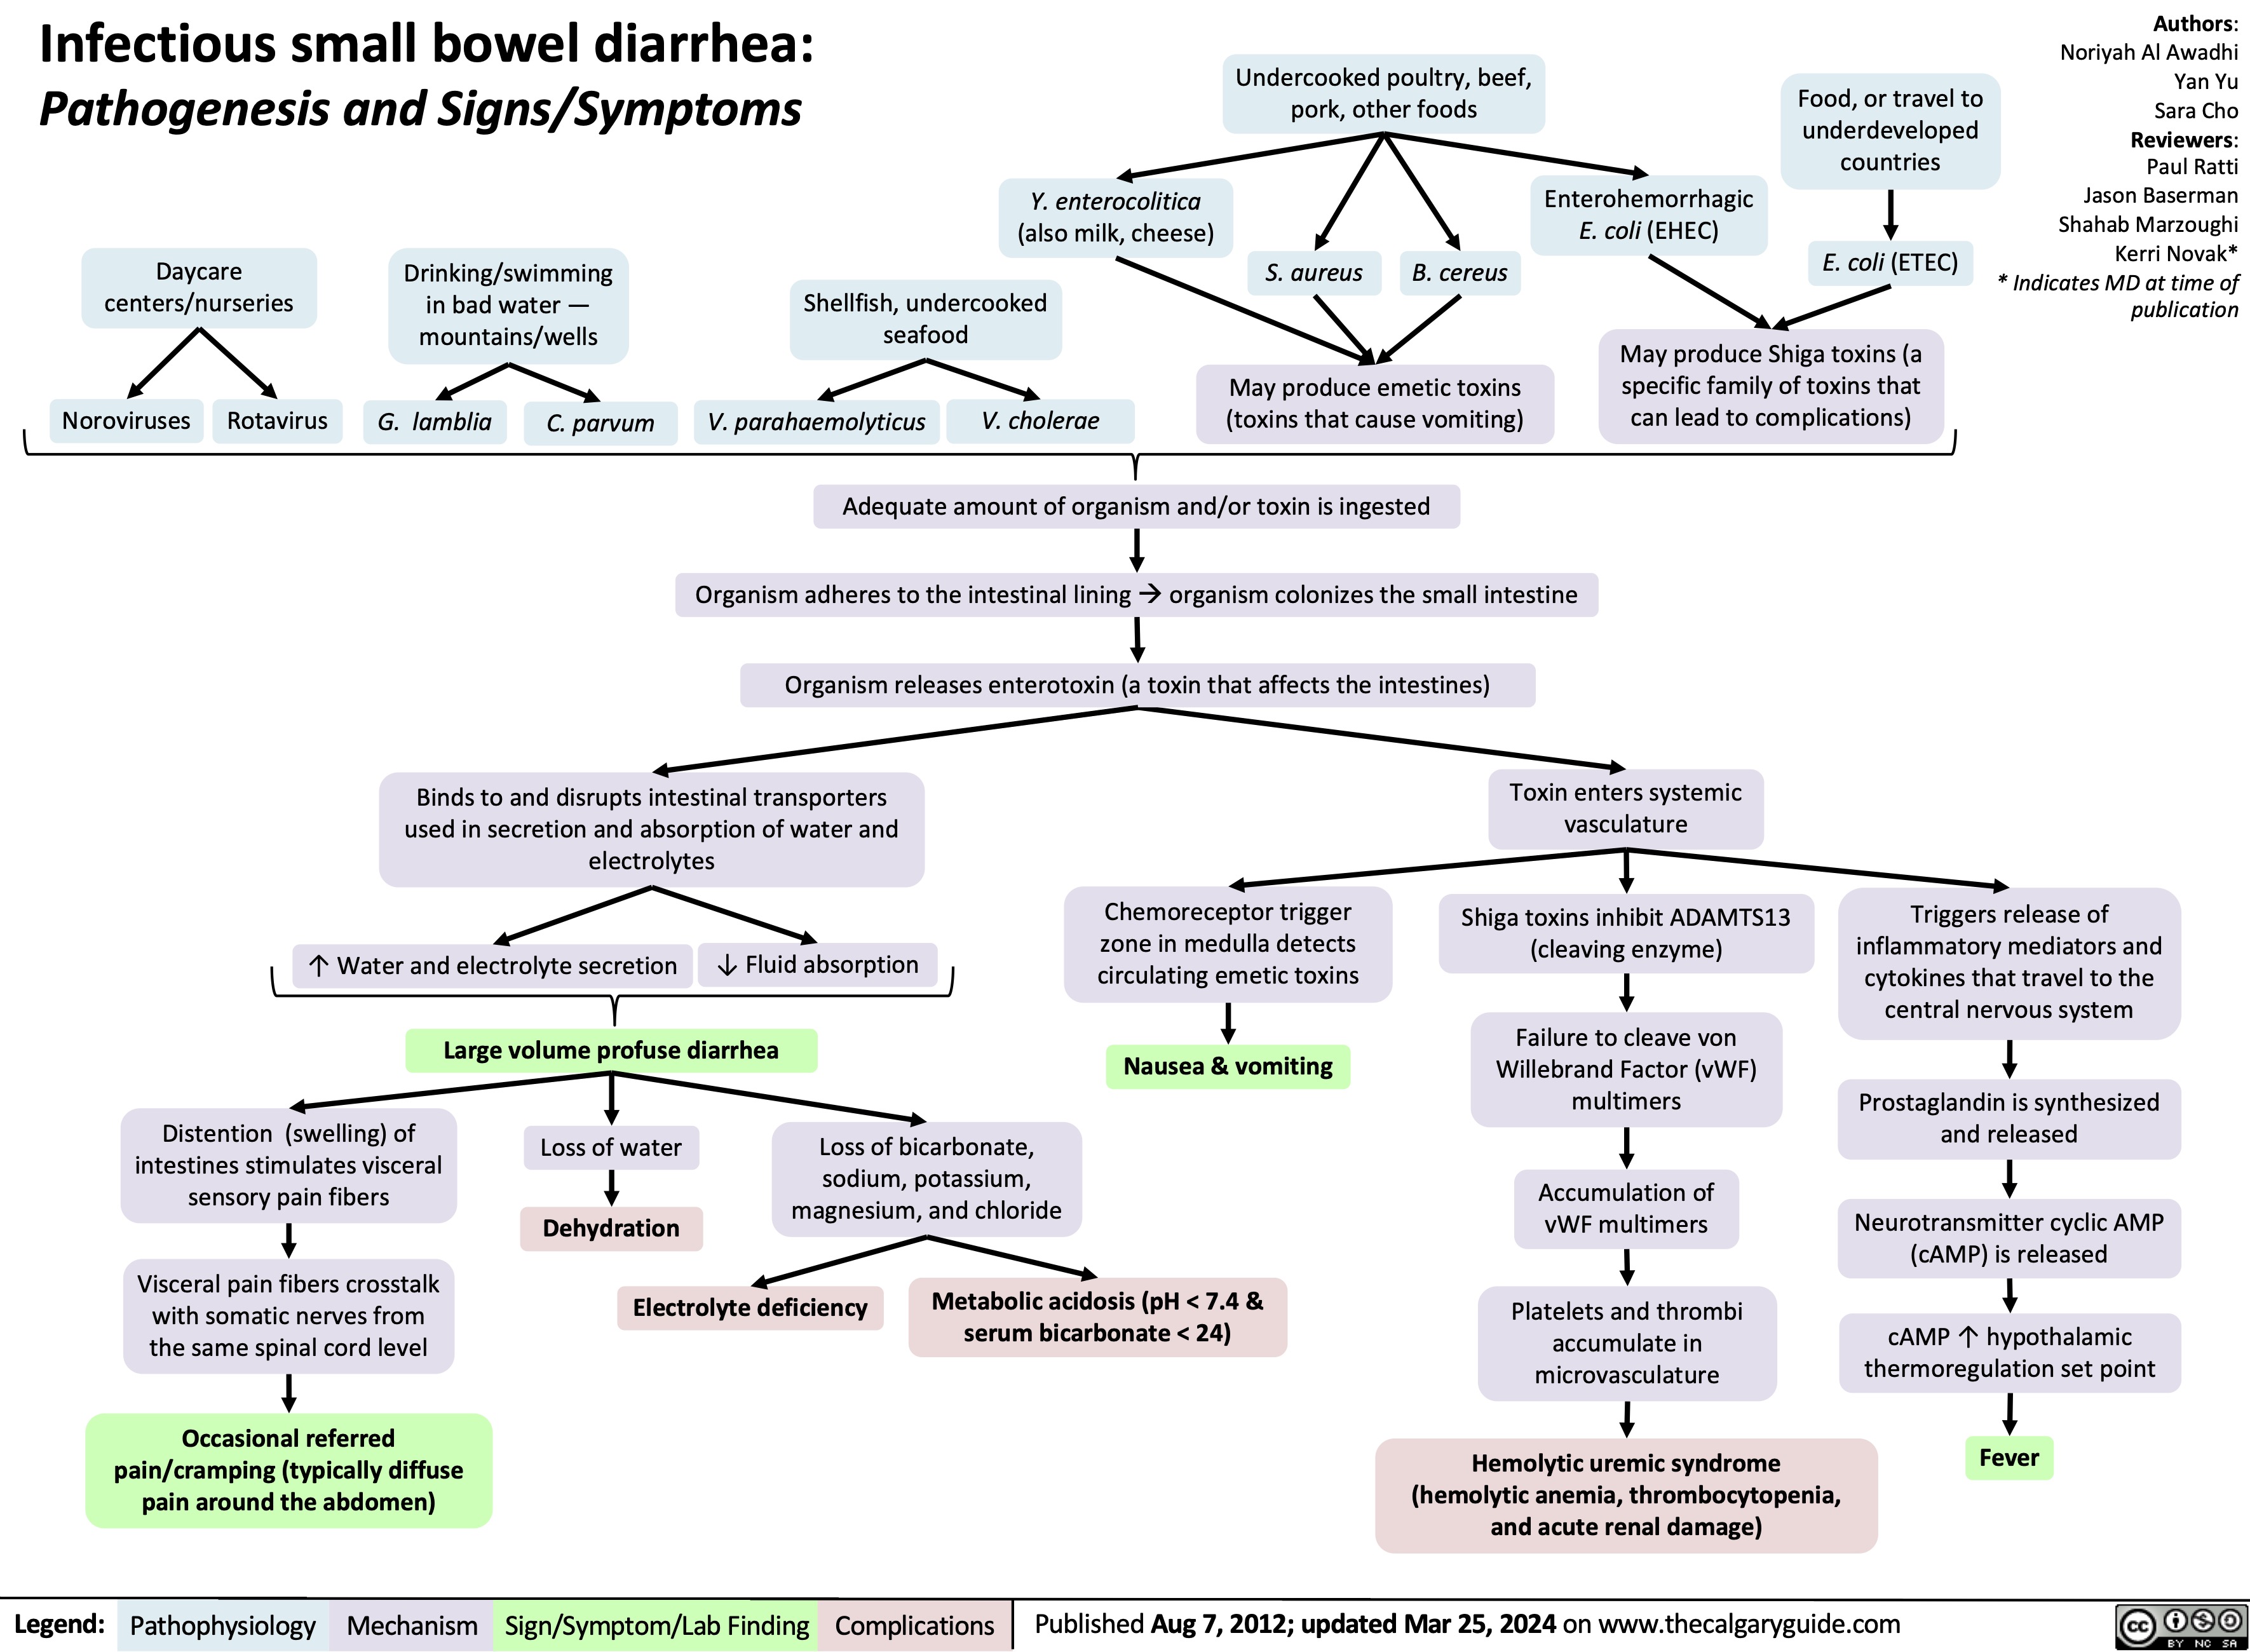 Infectious small bowel diarrhea:
Pathogenesis and Signs/Symptoms
Undercooked poultry, beef, pork, other foods
Food, or travel to underdeveloped countries
E. coli (ETEC)
May produce Shiga toxins (a specific family of toxins that can lead to complications)
Authors: Noriyah Al Awadhi Yan Yu Sara Cho Reviewers: Paul Ratti Jason Baserman Shahab Marzoughi Kerri Novak* * Indicates MD at time of publication
      Y. enterocolitica
(also milk, cheese)
Shellfish, undercooked seafood
V. parahaemolyticus V. cholerae
Enterohemorrhagic E. coli (EHEC)
      Daycare centers/nurseries
Drinking/swimming in bad water — mountains/wells
S. aureus
B. cereus
            Noroviruses
Rotavirus
G. lamblia
C. parvum
May produce emetic toxins (toxins that cause vomiting)
  Adequate amount of organism and/or toxin is ingested
Organism adheres to the intestinal liningàorganism colonizes the small intestine Organism releases enterotoxin (a toxin that affects the intestines)
      Binds to and disrupts intestinal transporters used in secretion and absorption of water and electrolytes
Toxin enters systemic vasculature
Shiga toxins inhibit ADAMTS13 (cleaving enzyme)
Failure to cleave von Willebrand Factor (vWF) multimers
Accumulation of vWF multimers
Platelets and thrombi accumulate in microvasculature
Hemolytic uremic syndrome (hemolytic anemia, thrombocytopenia, and acute renal damage)
         ↑ Water and electrolyte secretion
↓ Fluid absorption
Chemoreceptor trigger zone in medulla detects circulating emetic toxins
Nausea & vomiting
Triggers release of inflammatory mediators and cytokines that travel to the central nervous system
Prostaglandin is synthesized and released
Neurotransmitter cyclic AMP (cAMP) is released
cAMP ↑ hypothalamic thermoregulation set point
Fever
   Large volume profuse diarrhea
Loss of water
     Distention (swelling) of intestines stimulates visceral sensory pain fibers
Visceral pain fibers crosstalk with somatic nerves from the same spinal cord level
Occasional referred pain/cramping (typically diffuse pain around the abdomen)
Loss of bicarbonate, sodium, potassium, magnesium, and chloride
     Dehydration
Electrolyte deficiency
Metabolic acidosis (pH < 7.4 & serum bicarbonate < 24)
          Legend:
 Pathophysiology
 Mechanism
 Sign/Symptom/Lab Finding
 Complications
 Published Aug 7, 2012; updated Mar 25, 2024 on www.thecalgaryguide.com
 